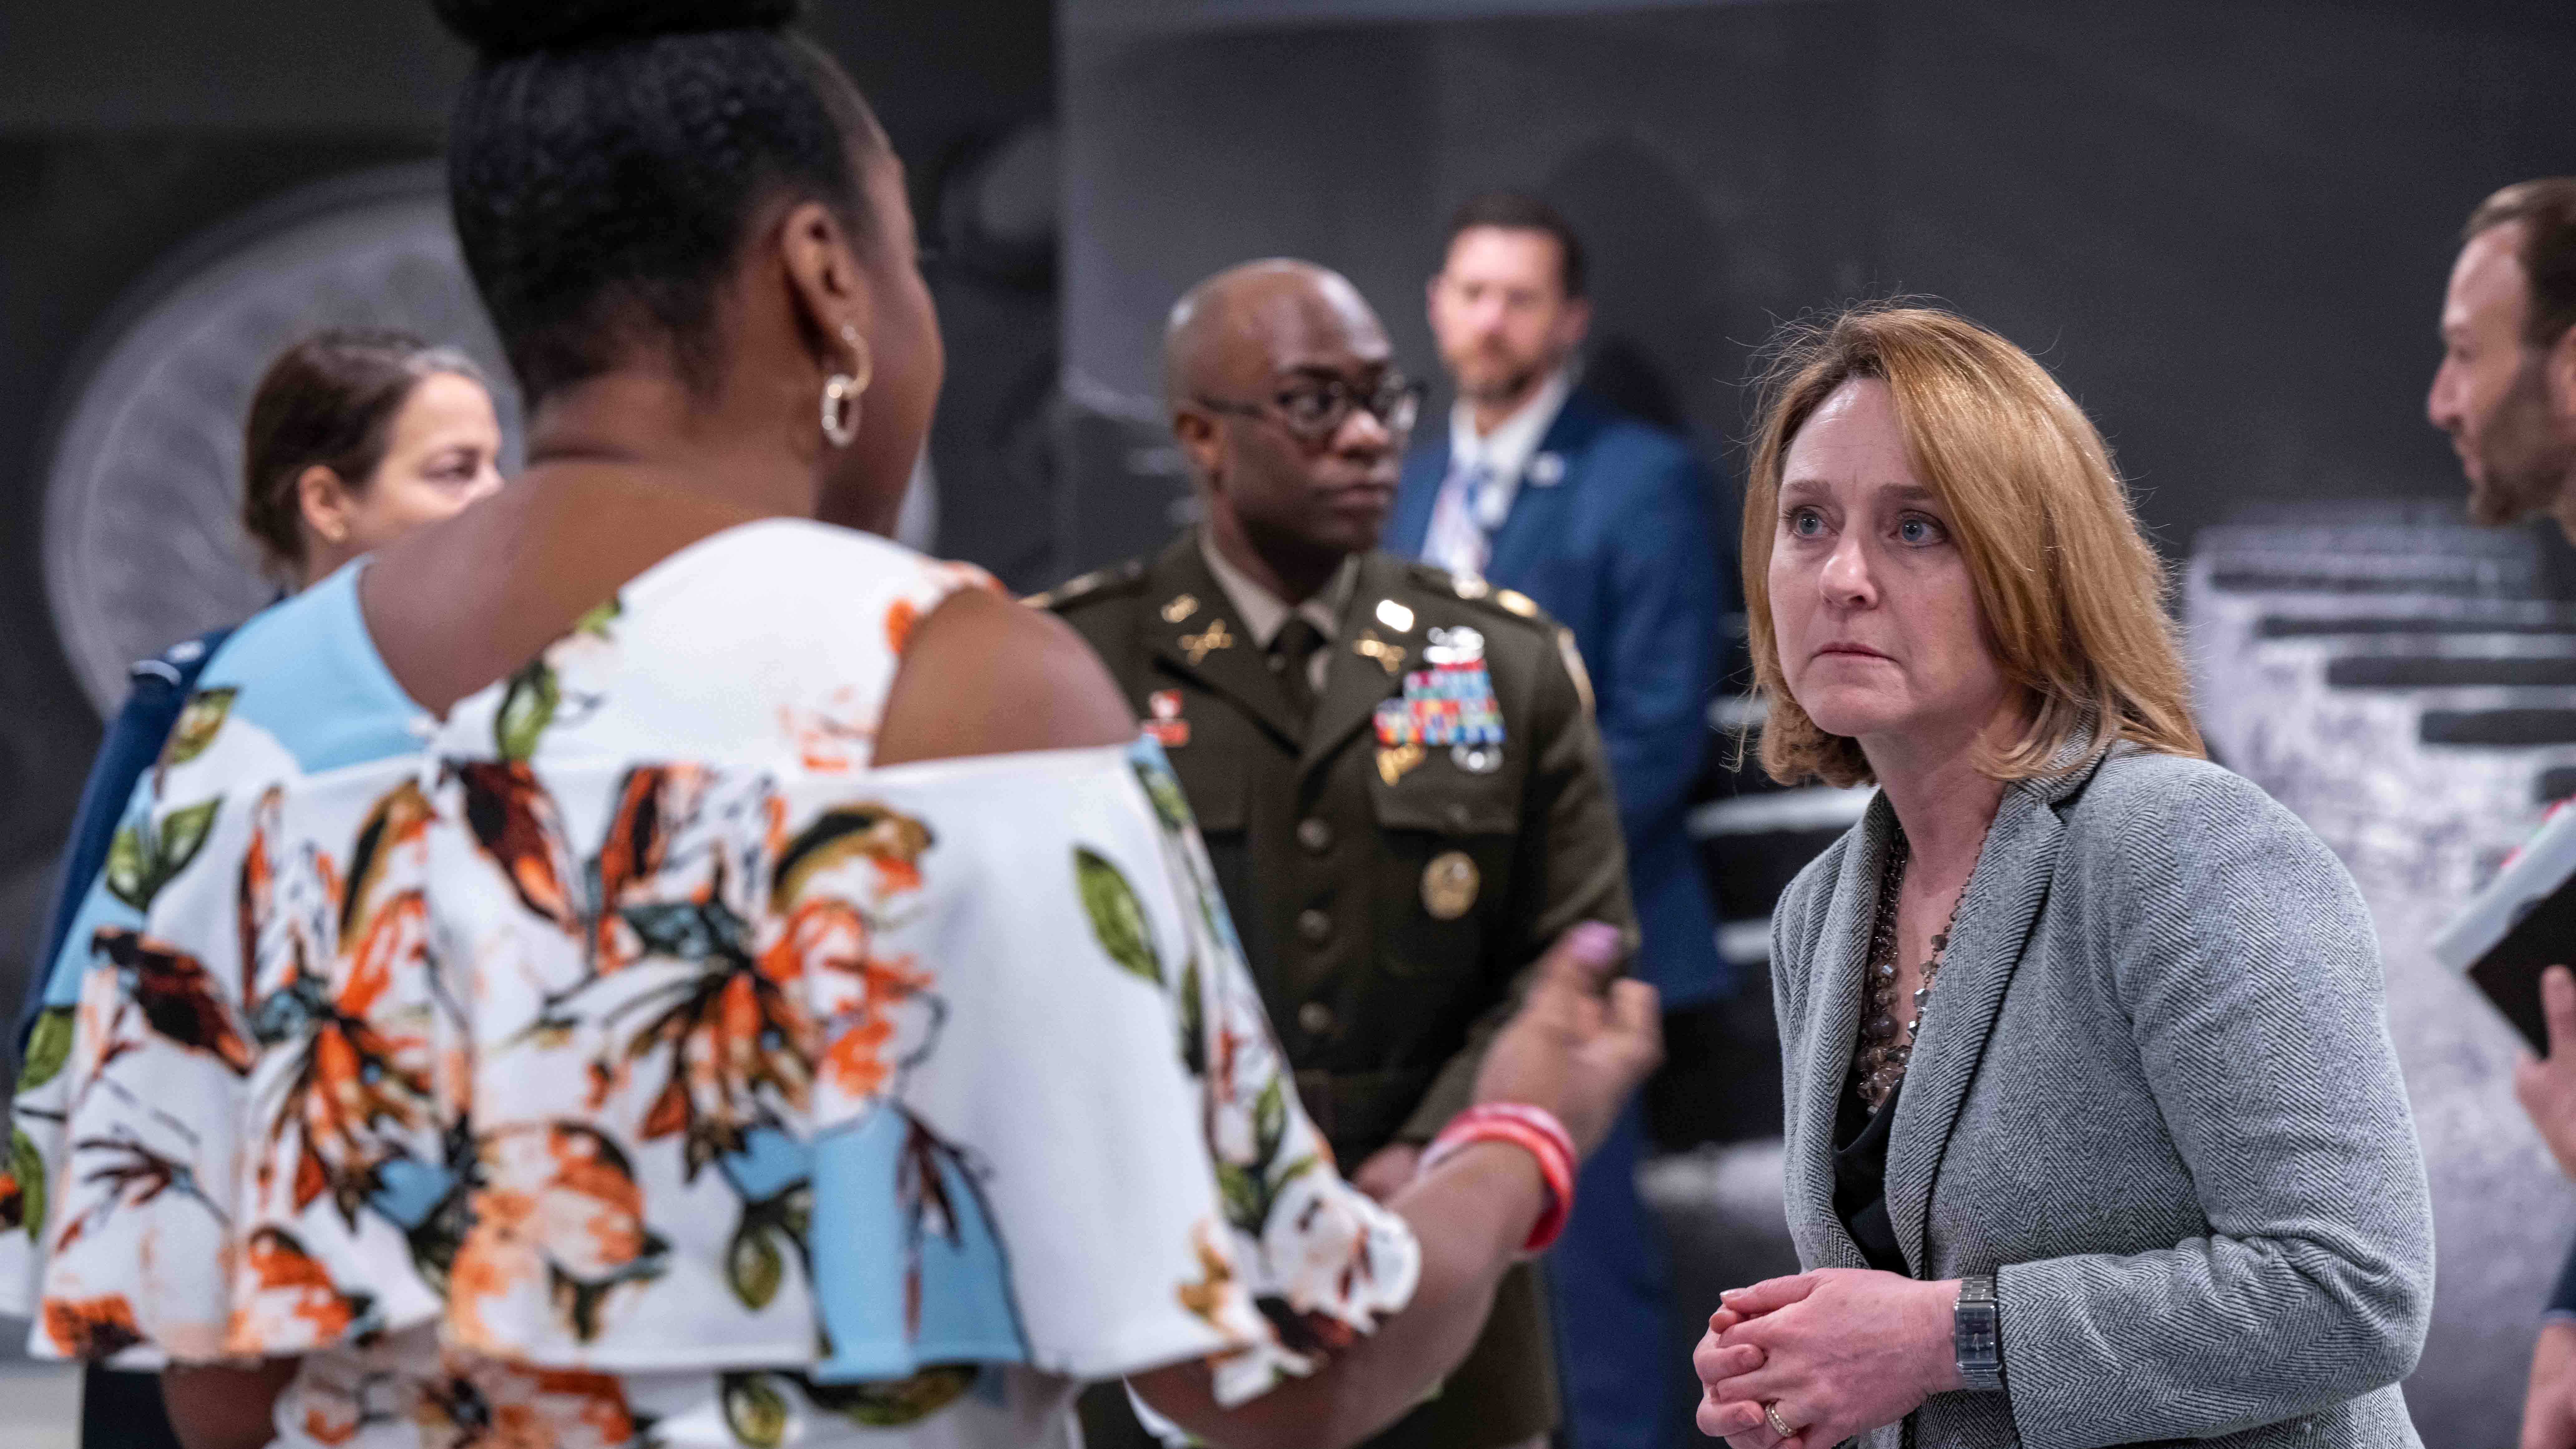 U.S. Secretary of Defense Kathleen Hicks attened a PACT Act and veterans benefits fair at the Pentagon in March. Local veterans organizations are working to get the word out about how the Act may make some eligible for additional benefits. (Image via Department of Defense)